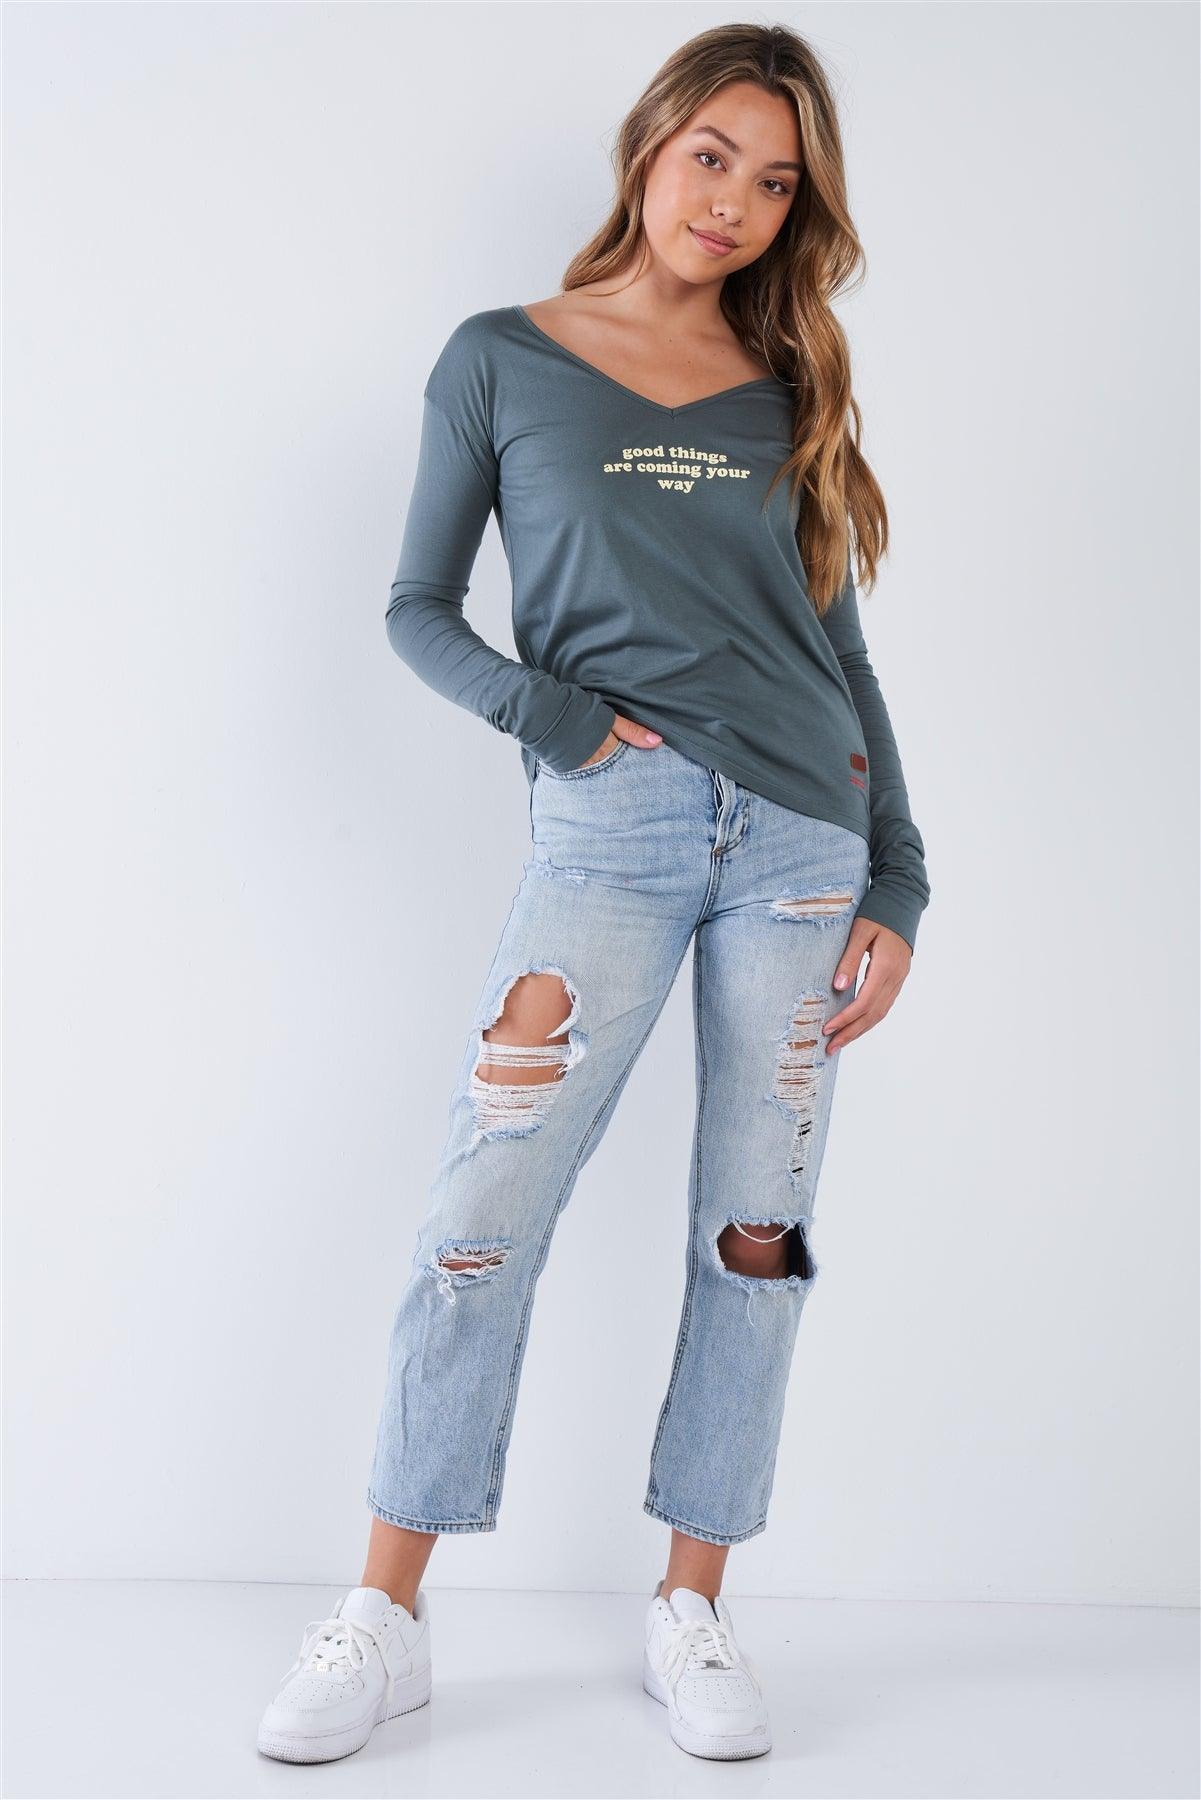 Kale Long Sleeve V-Neck "Good Things Are Coming Your Way" Top